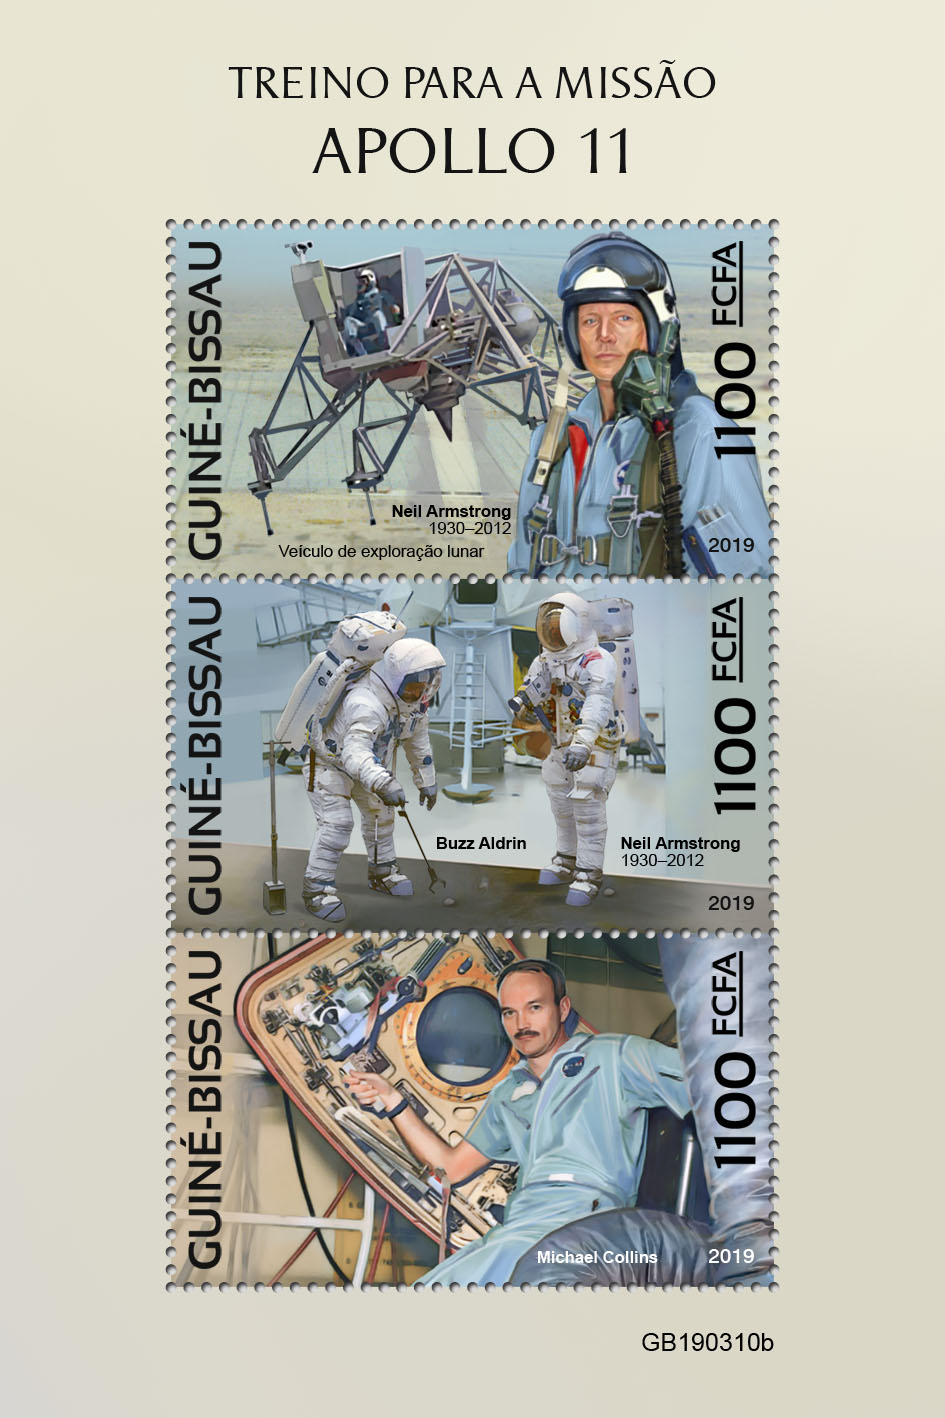 Apollo 11 - Issue of Guinée-Bissau postage stamps